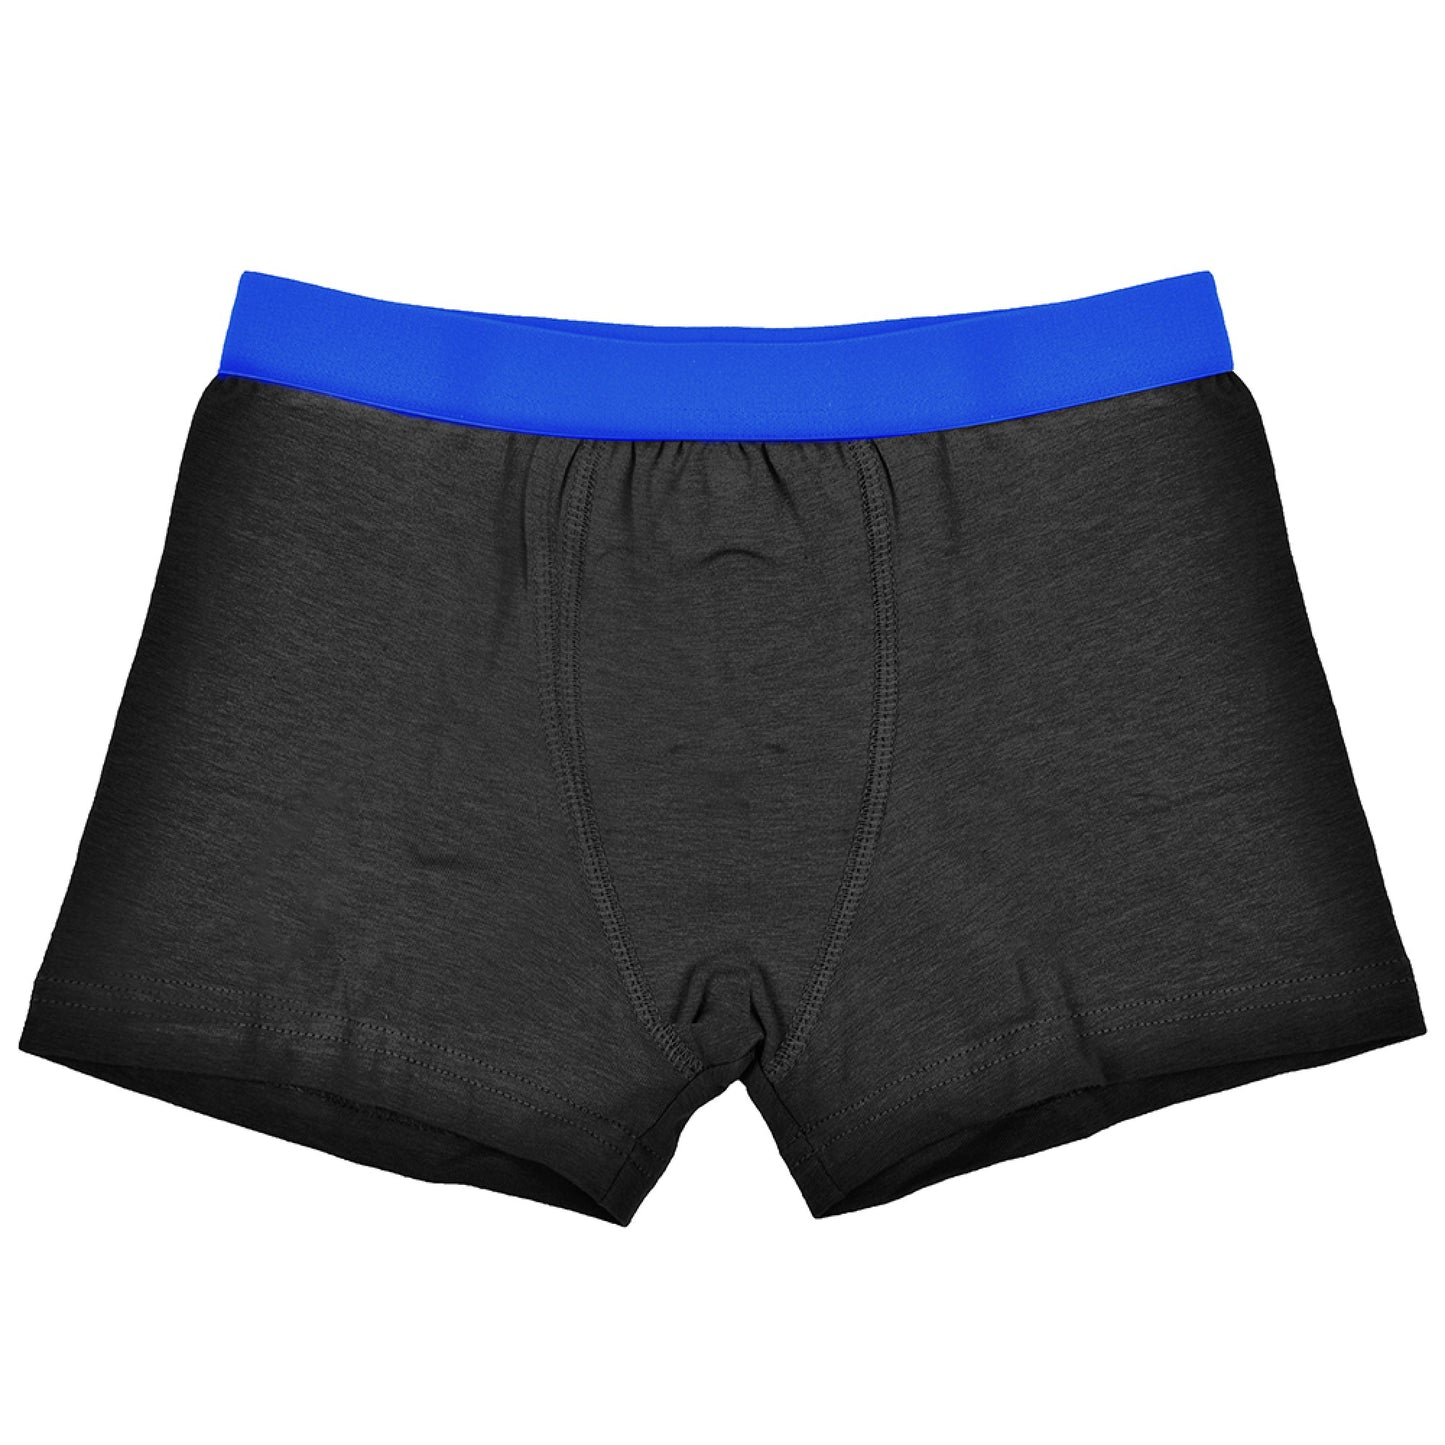 2 Pack Men's Soft Stretch Cotton Blend Jersey Trunks Underwear Underpants - Black with Coloured Waistbands